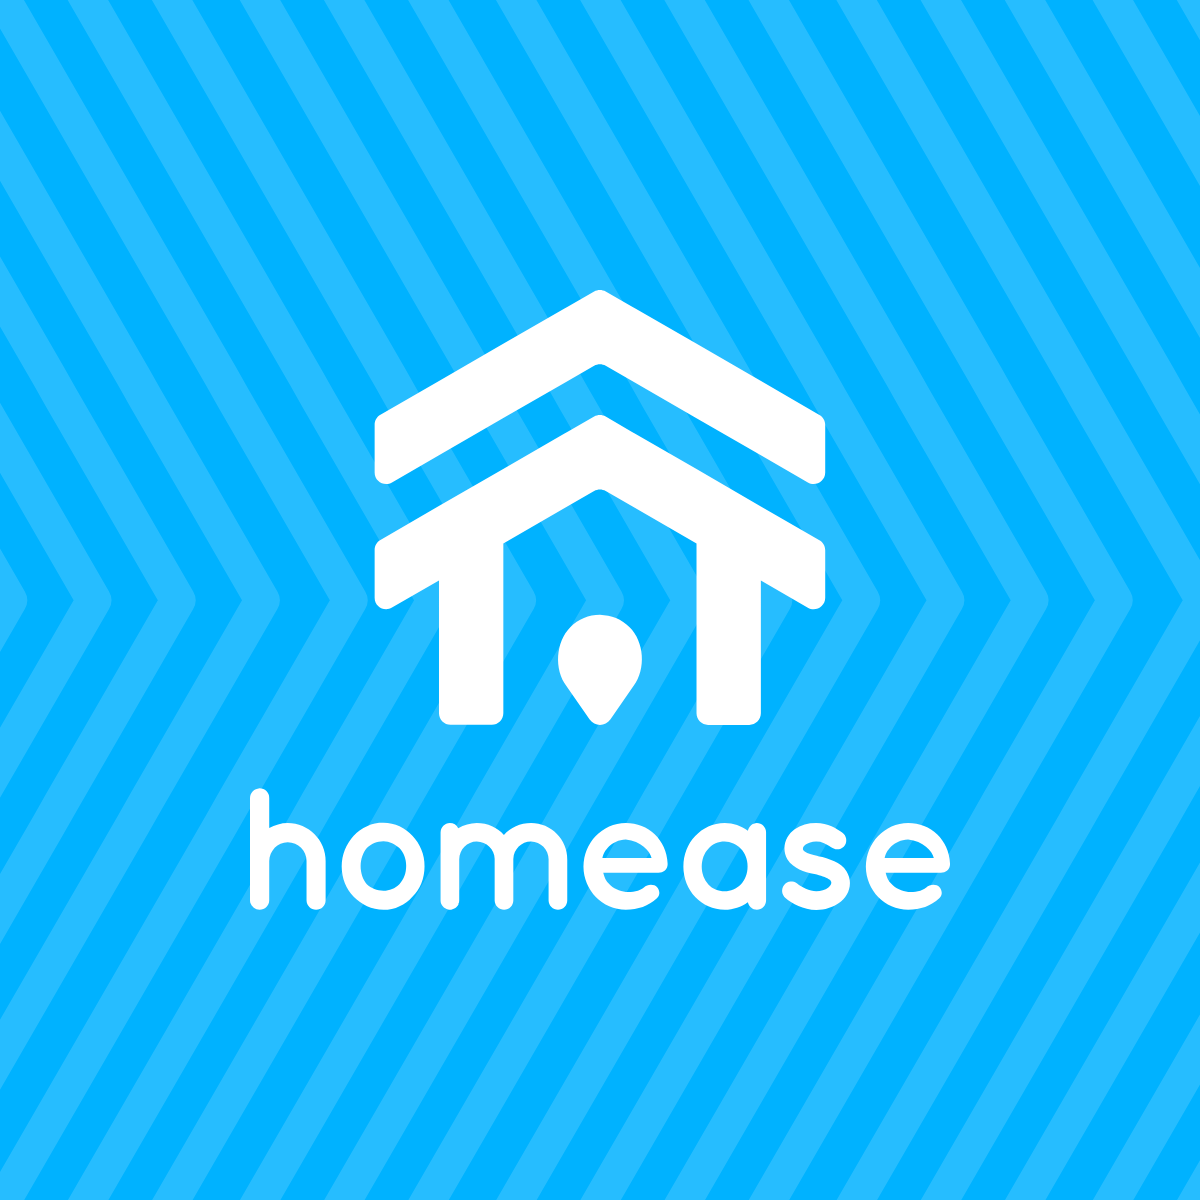 Homease